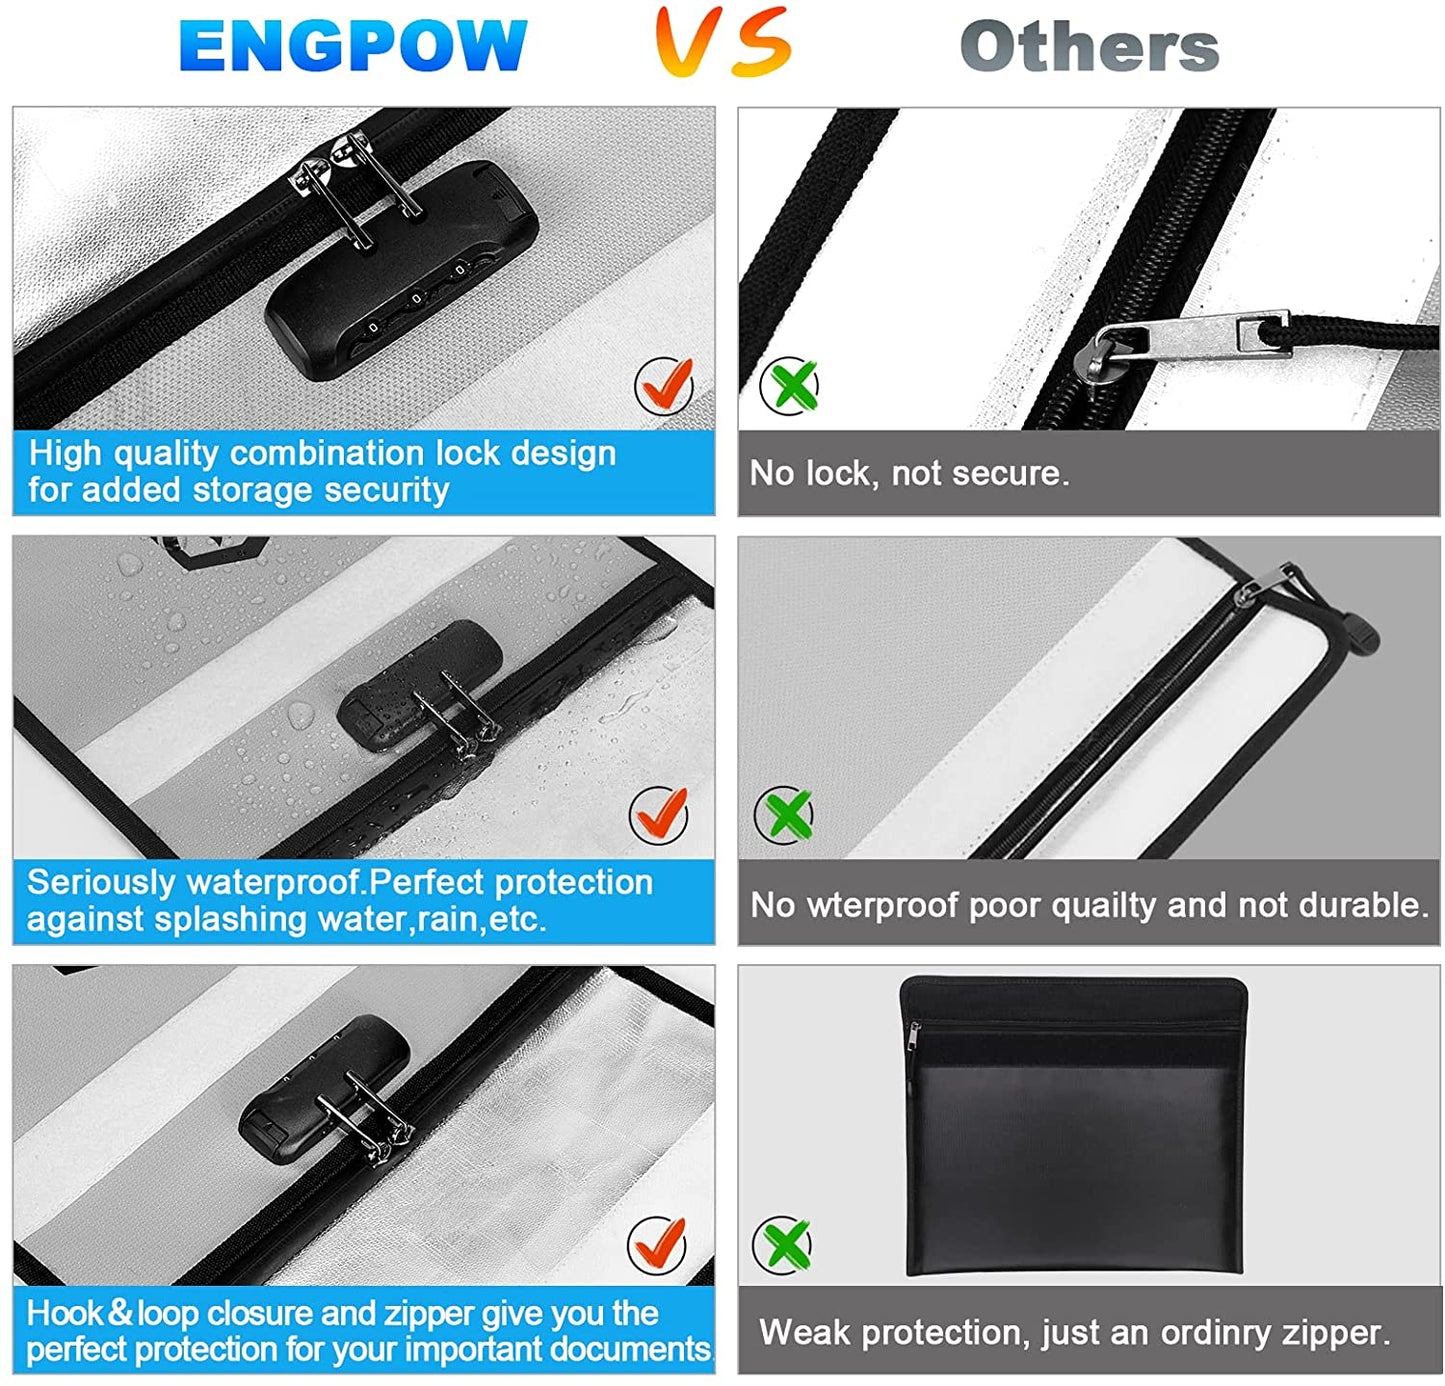 ENGPOW Fireproof Document Bag with Lock (2200℉)